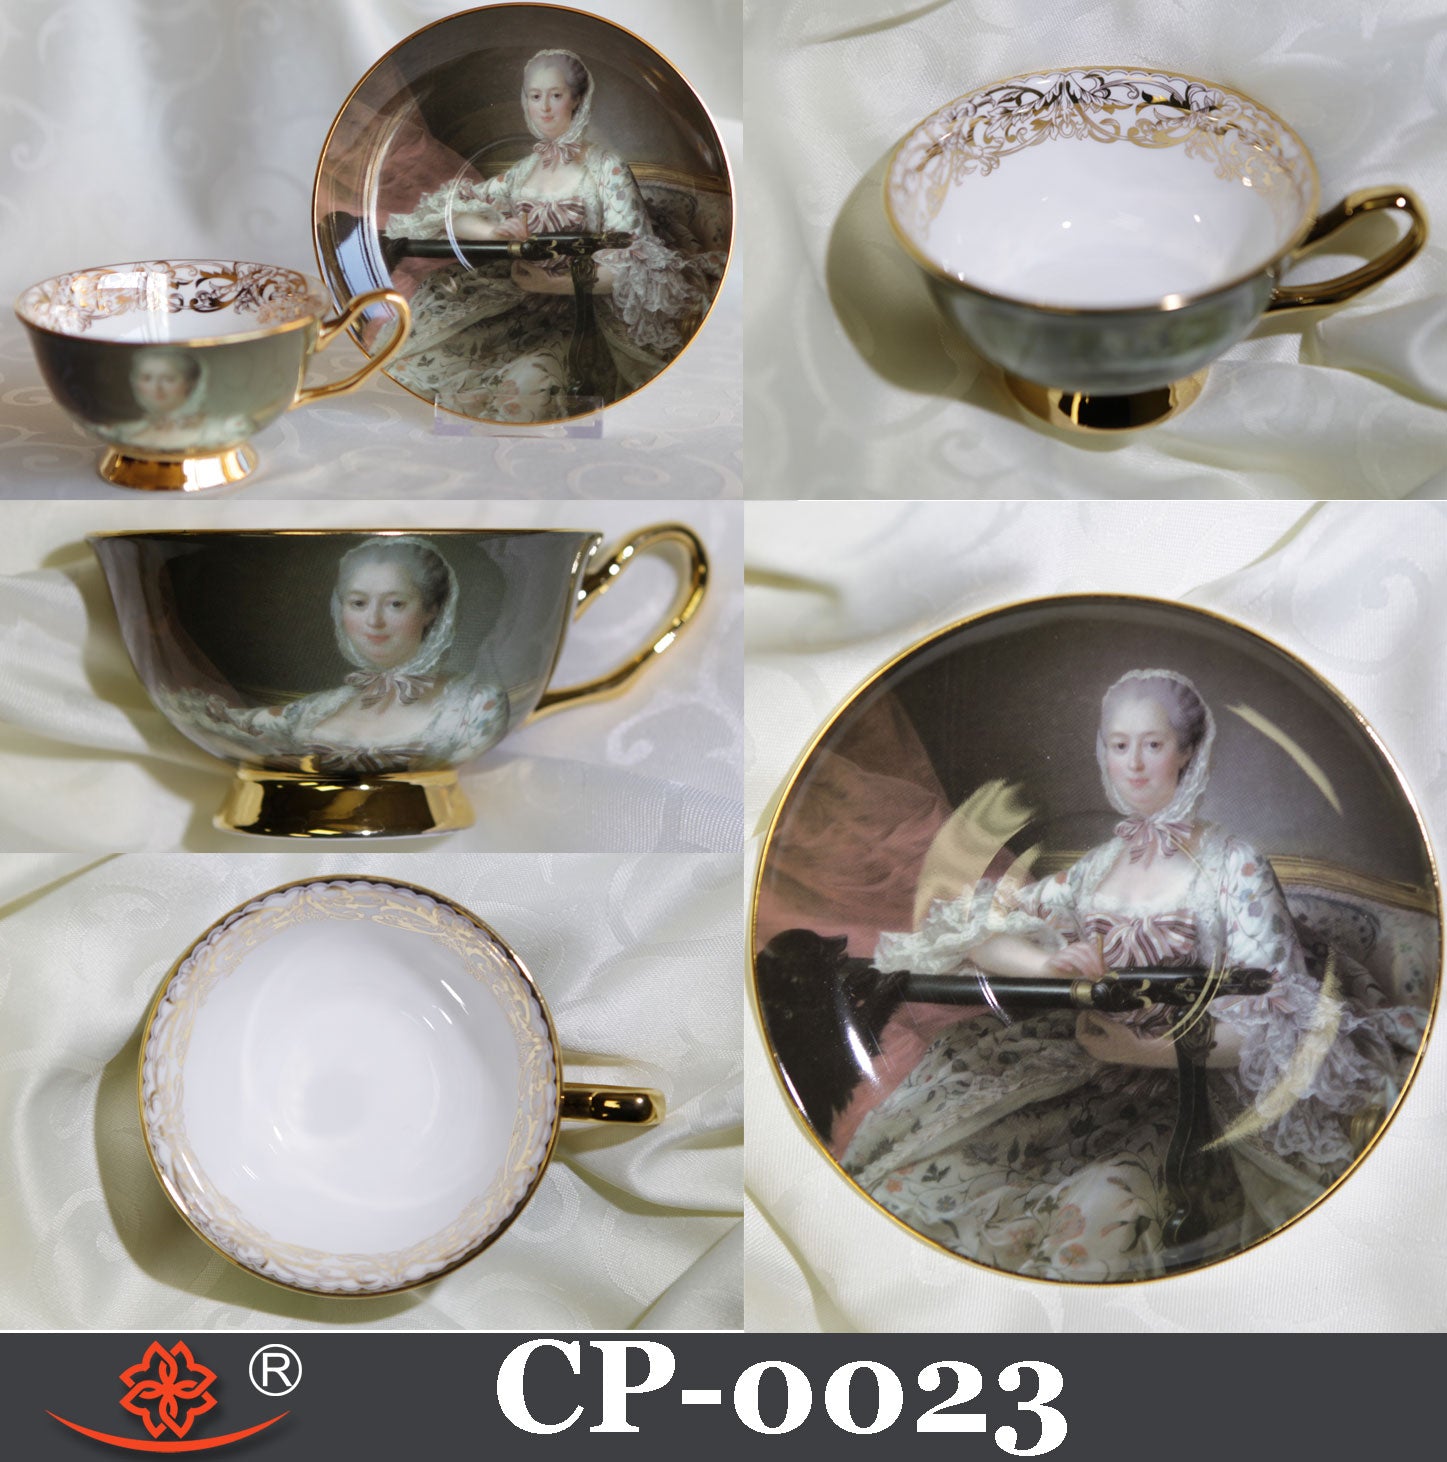 Teacup & Saucer Bone China Jeanne Antoinette 1721-1764 made by Euart - Royal Gift